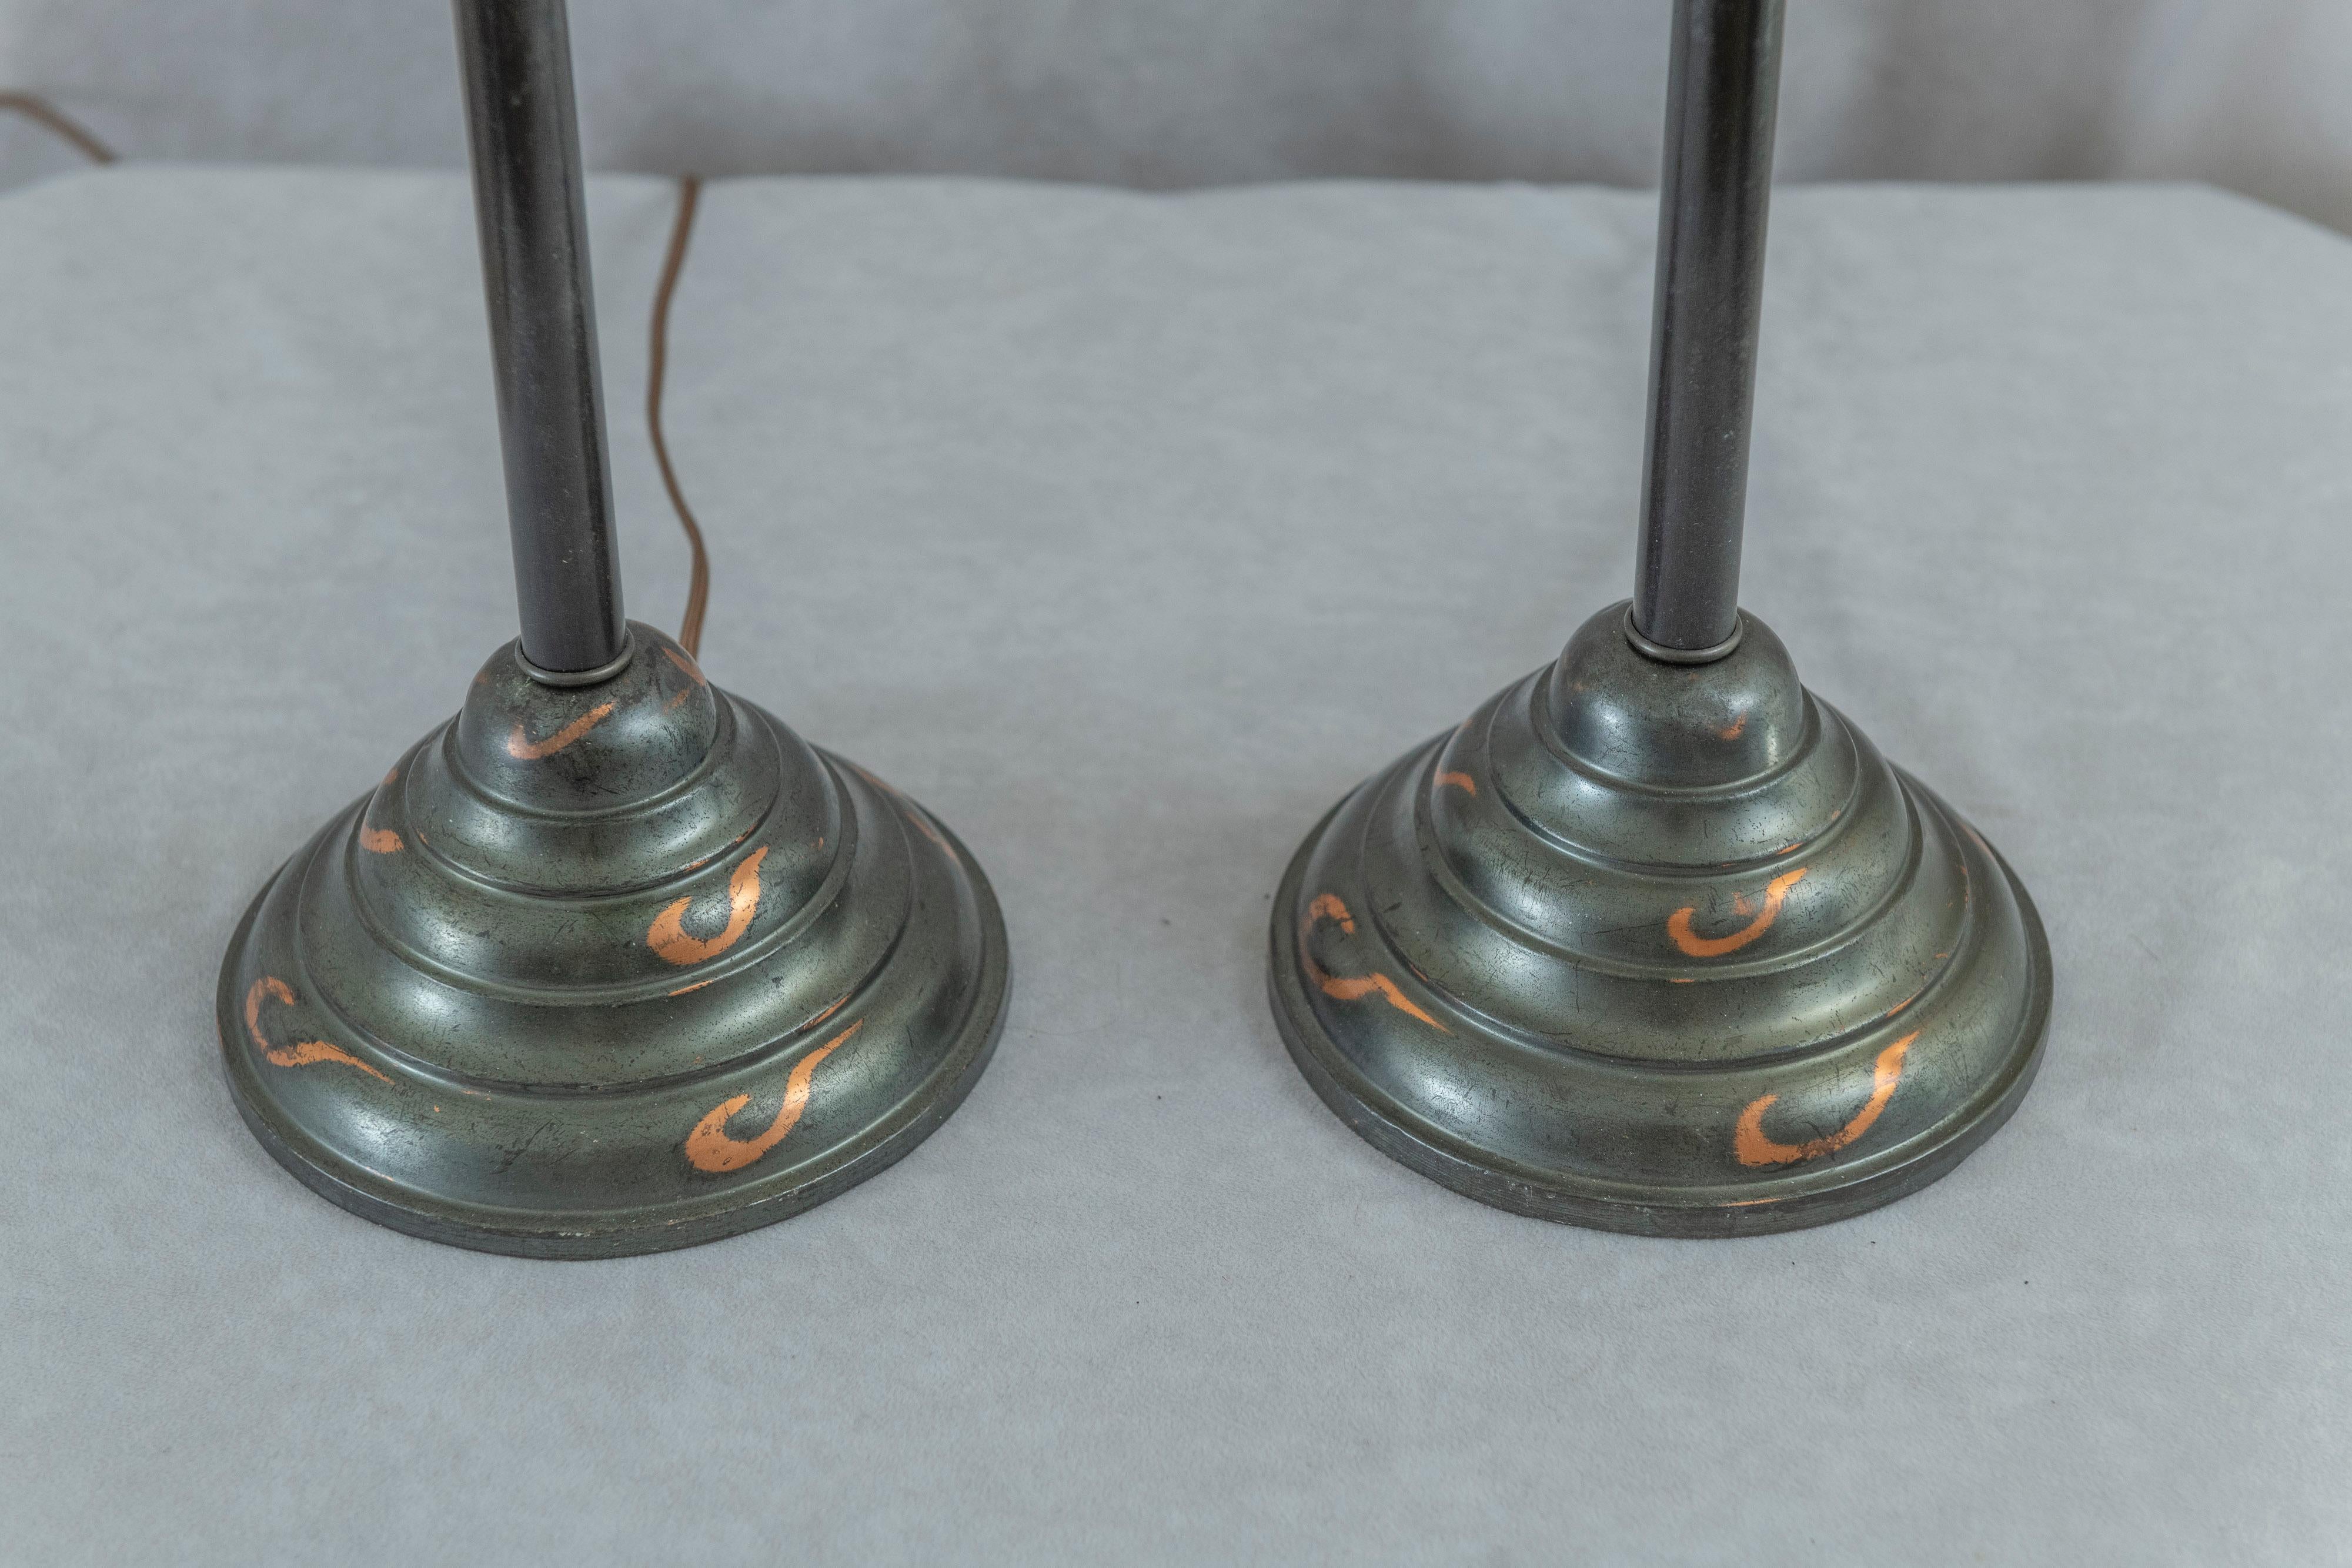 Hand-Crafted Pair Of Short Torchiere Lamps, Steuben Calcite Shades, Bronze Bases, ca. 1910